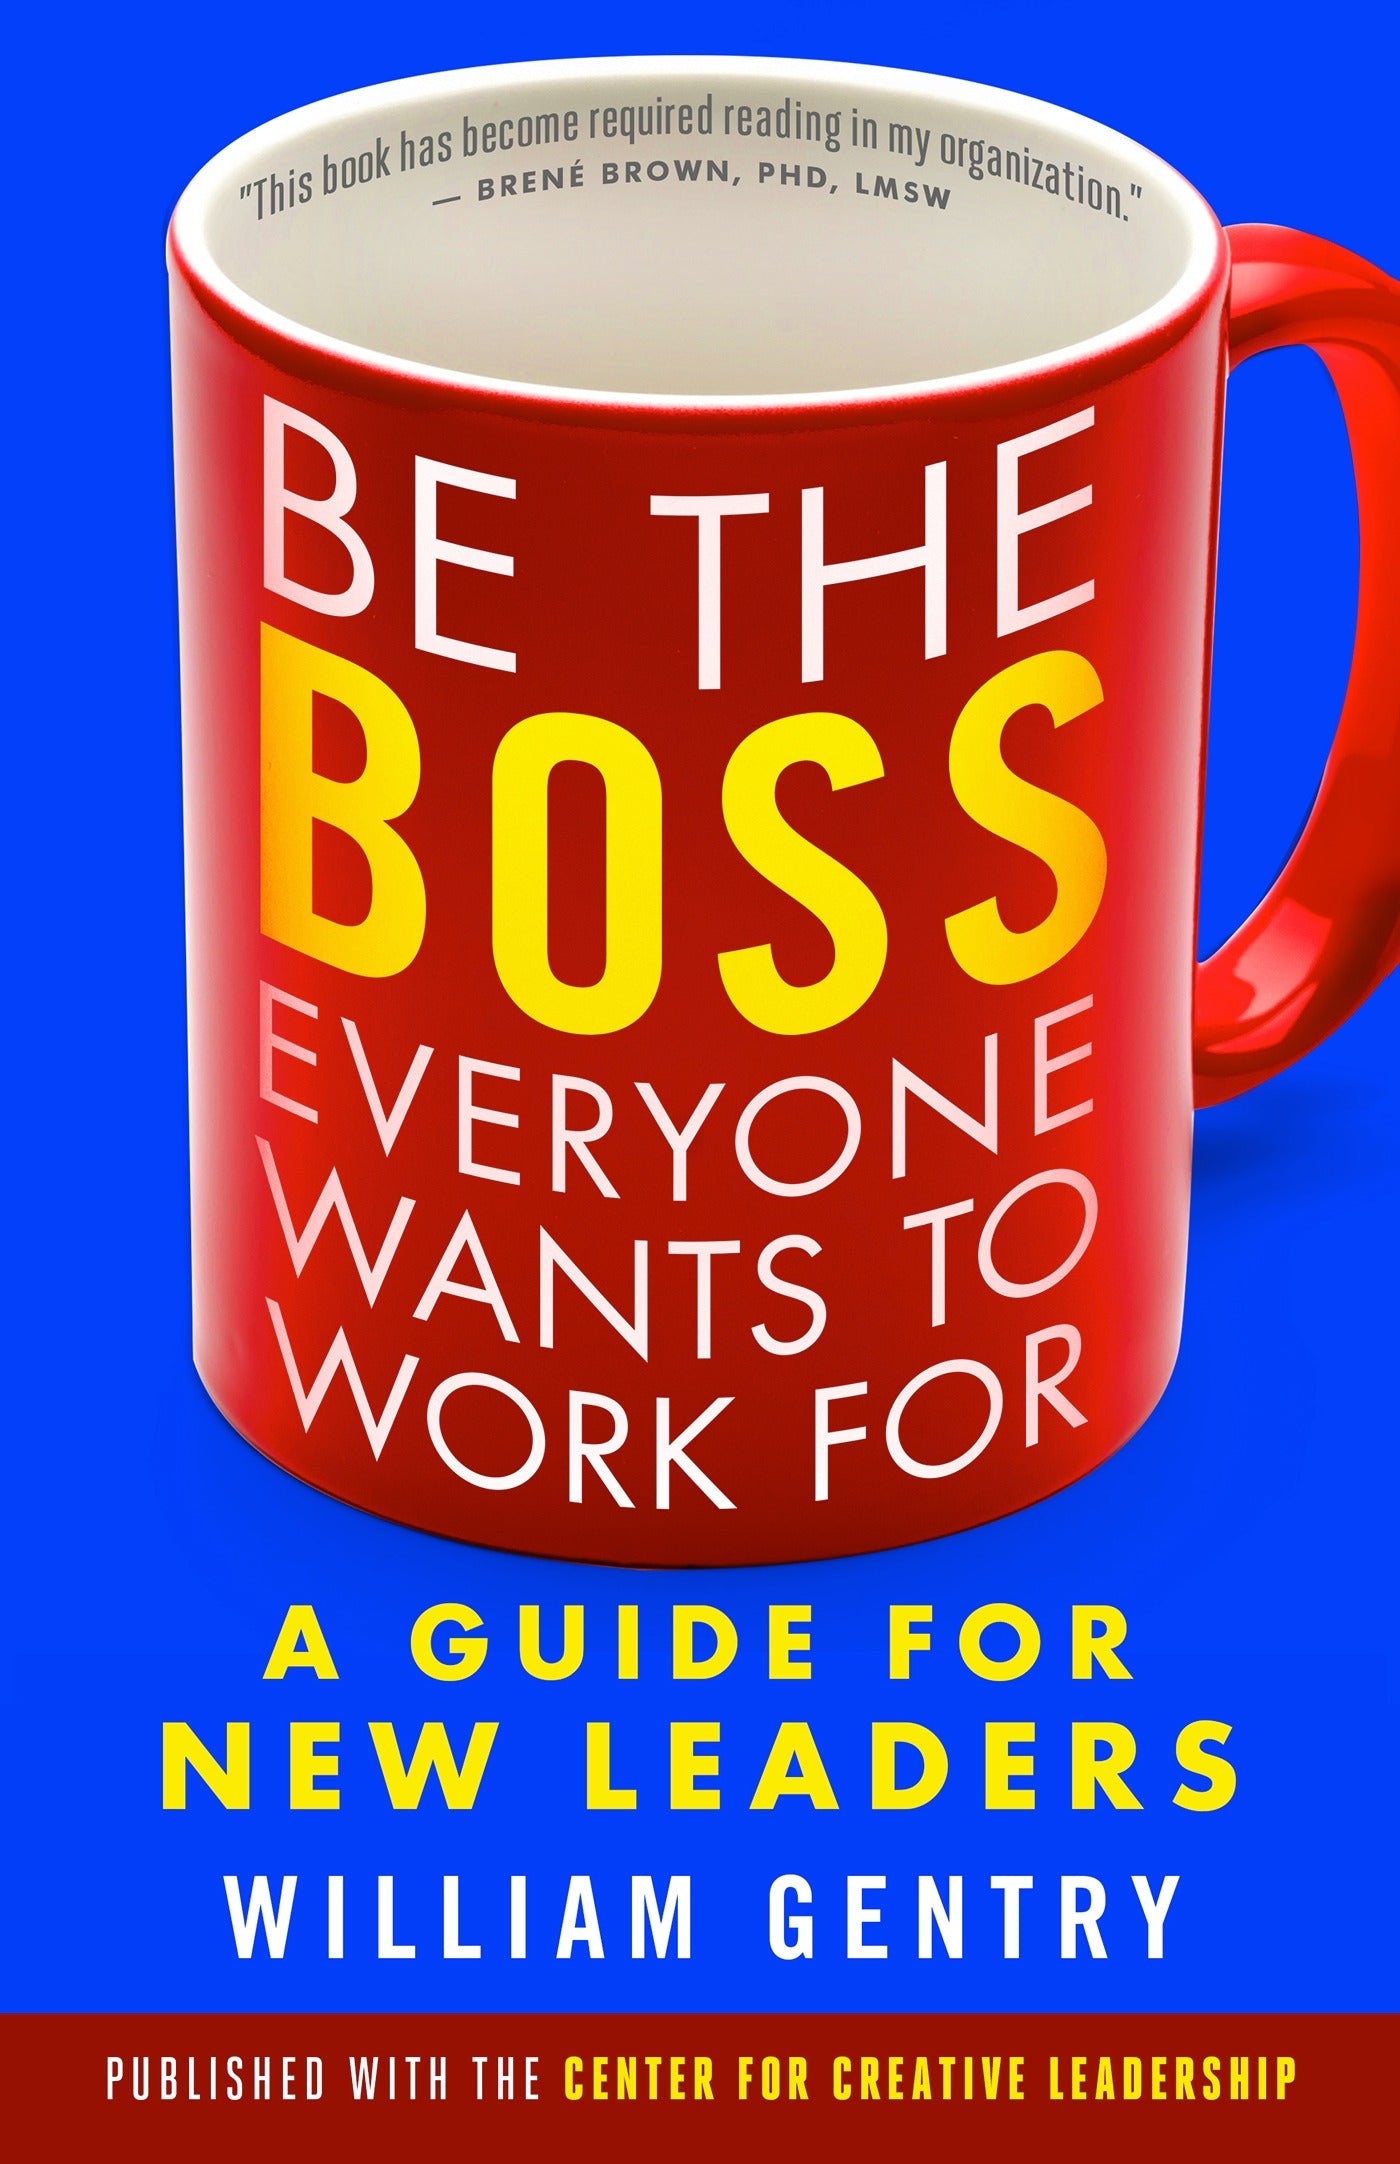 Be the Boss Everyone Wants to Work For